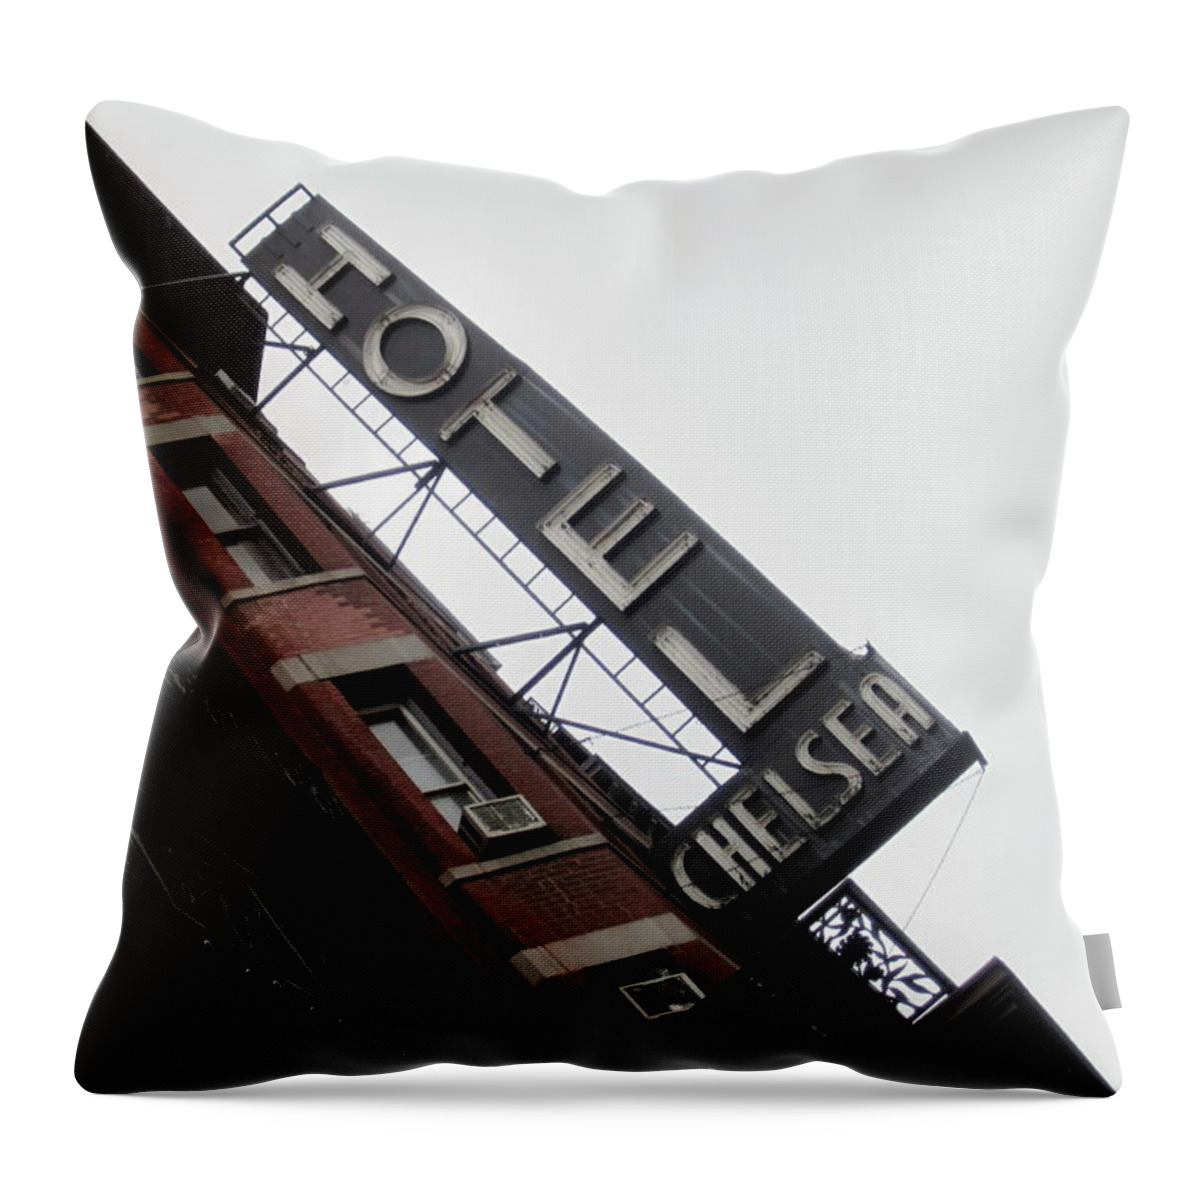 Chelsea Hotel Throw Pillow featuring the photograph Chelsea Hotel Sign by Chris Goldberg